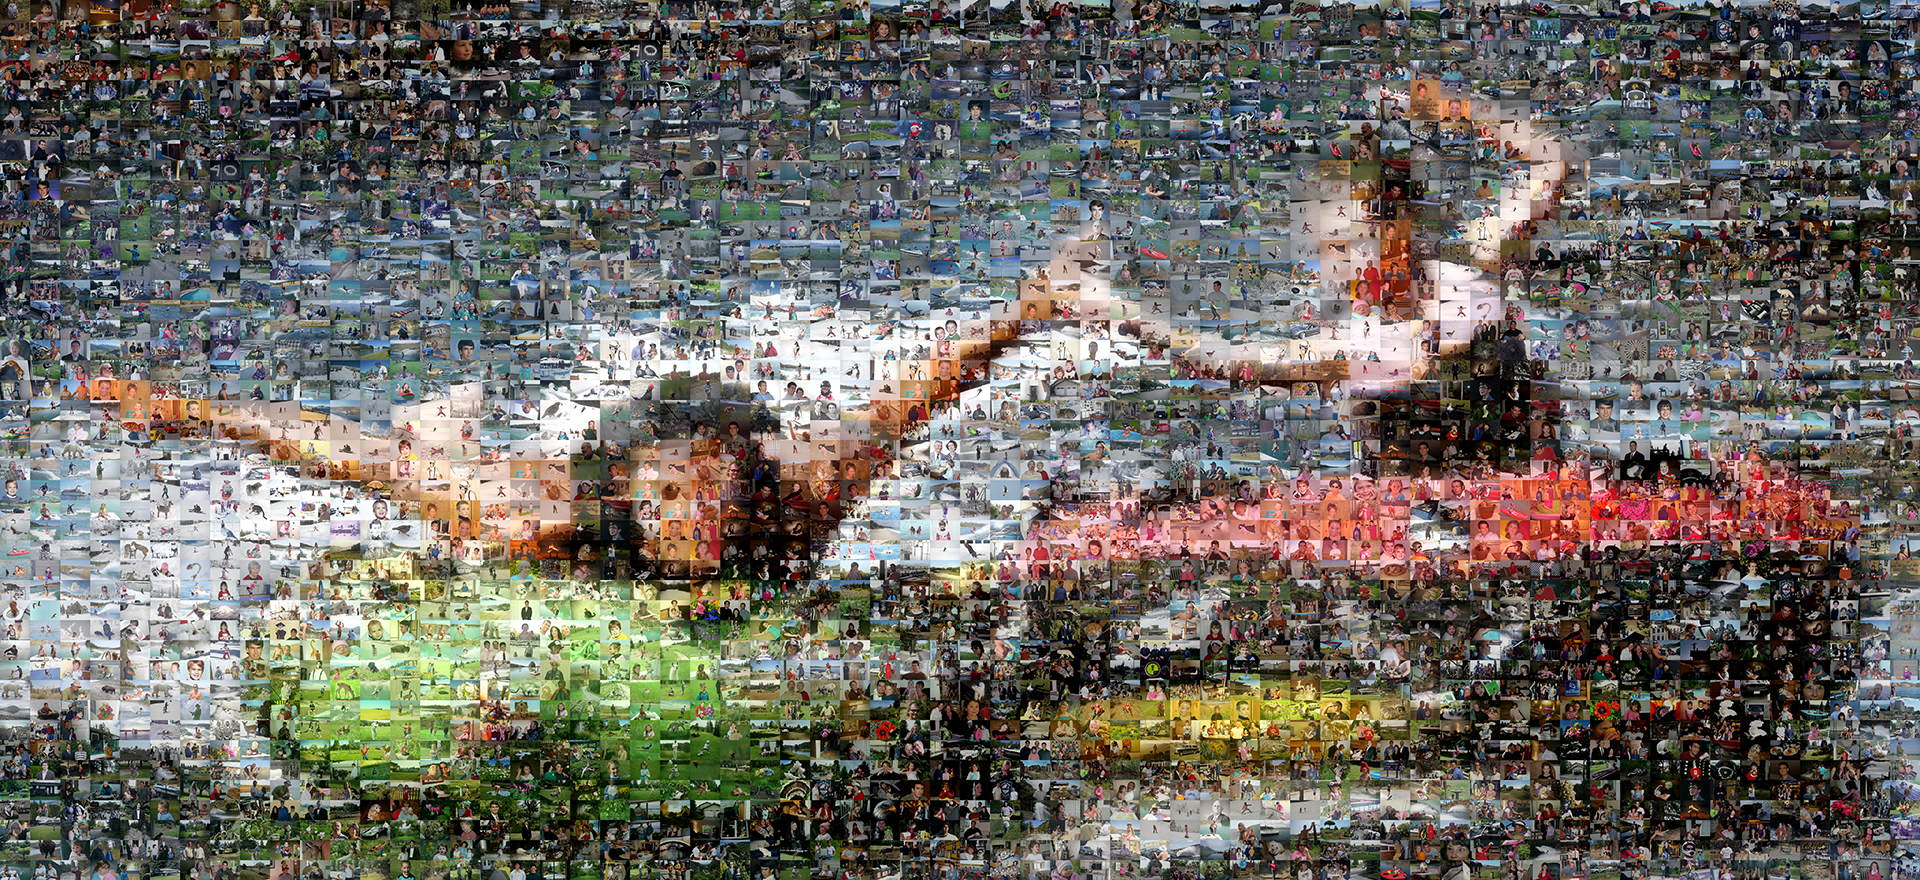 photo mosaic this action shot was captured as a mosaic using 2,773 family photos